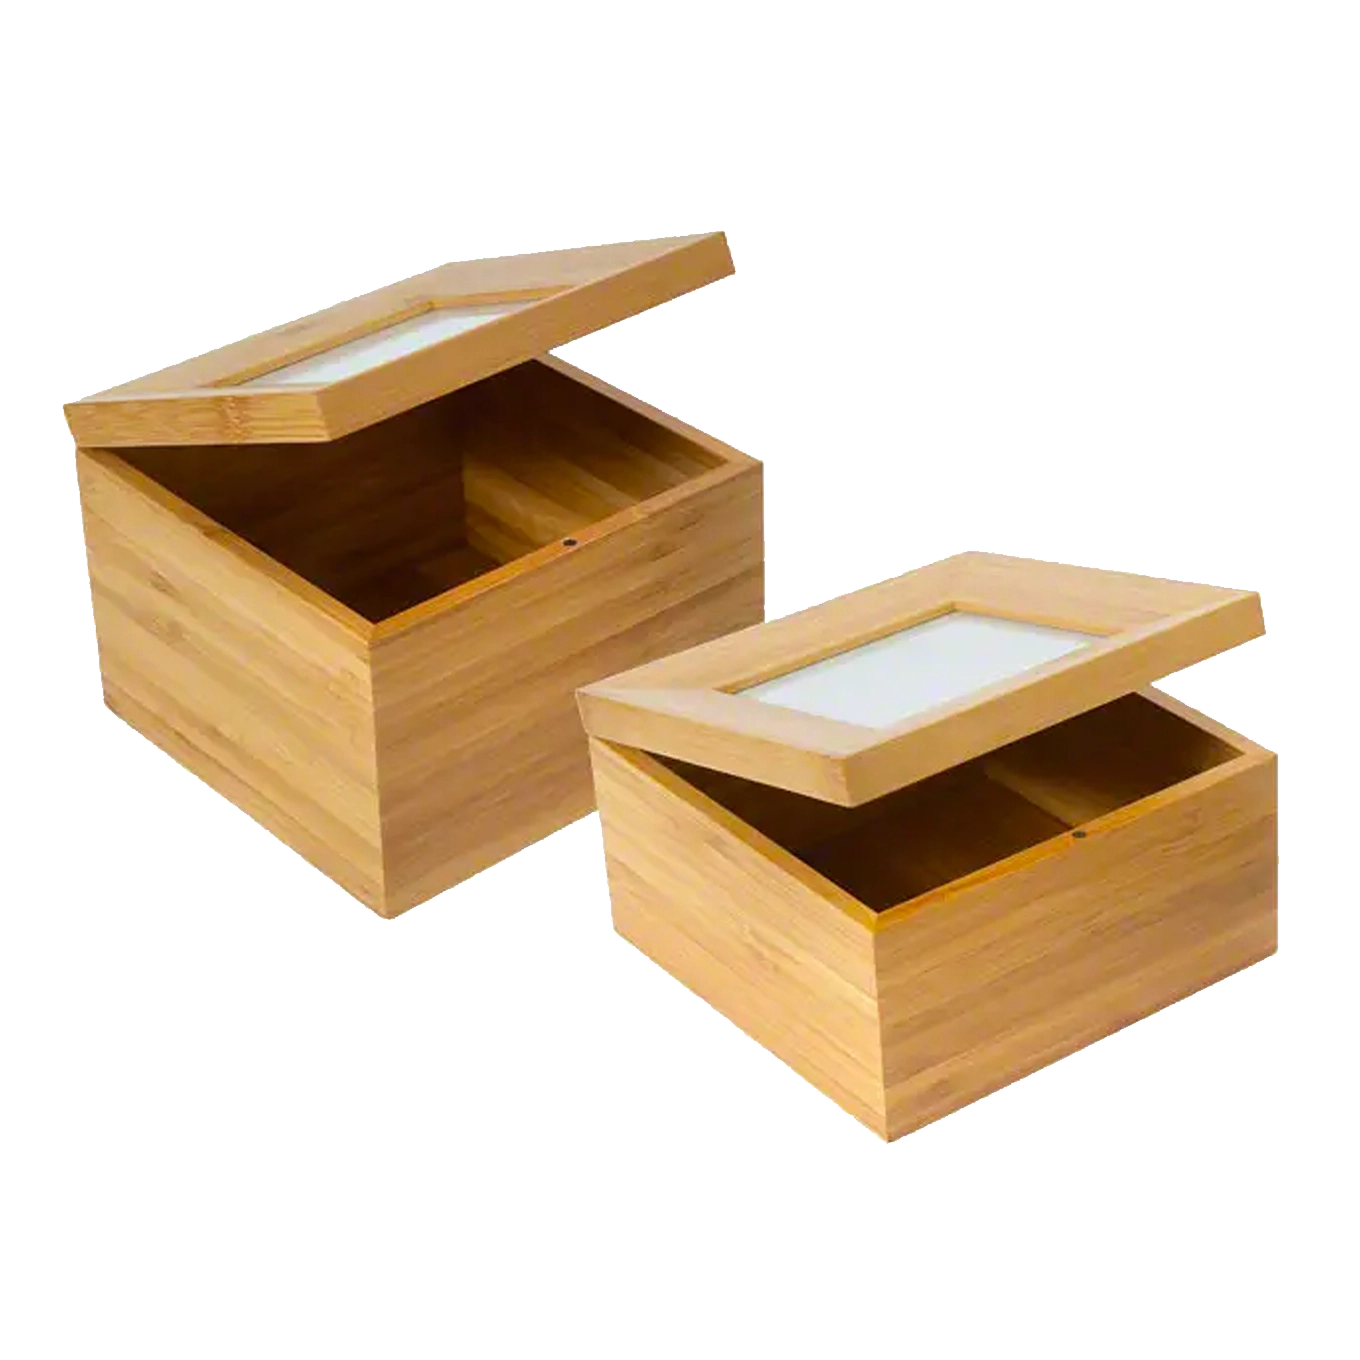 TRIBUTE BOX This stylish and contemporary bamboo ashes casket with photo frame lid is a discreet way to keep your pet’s ashes at home.